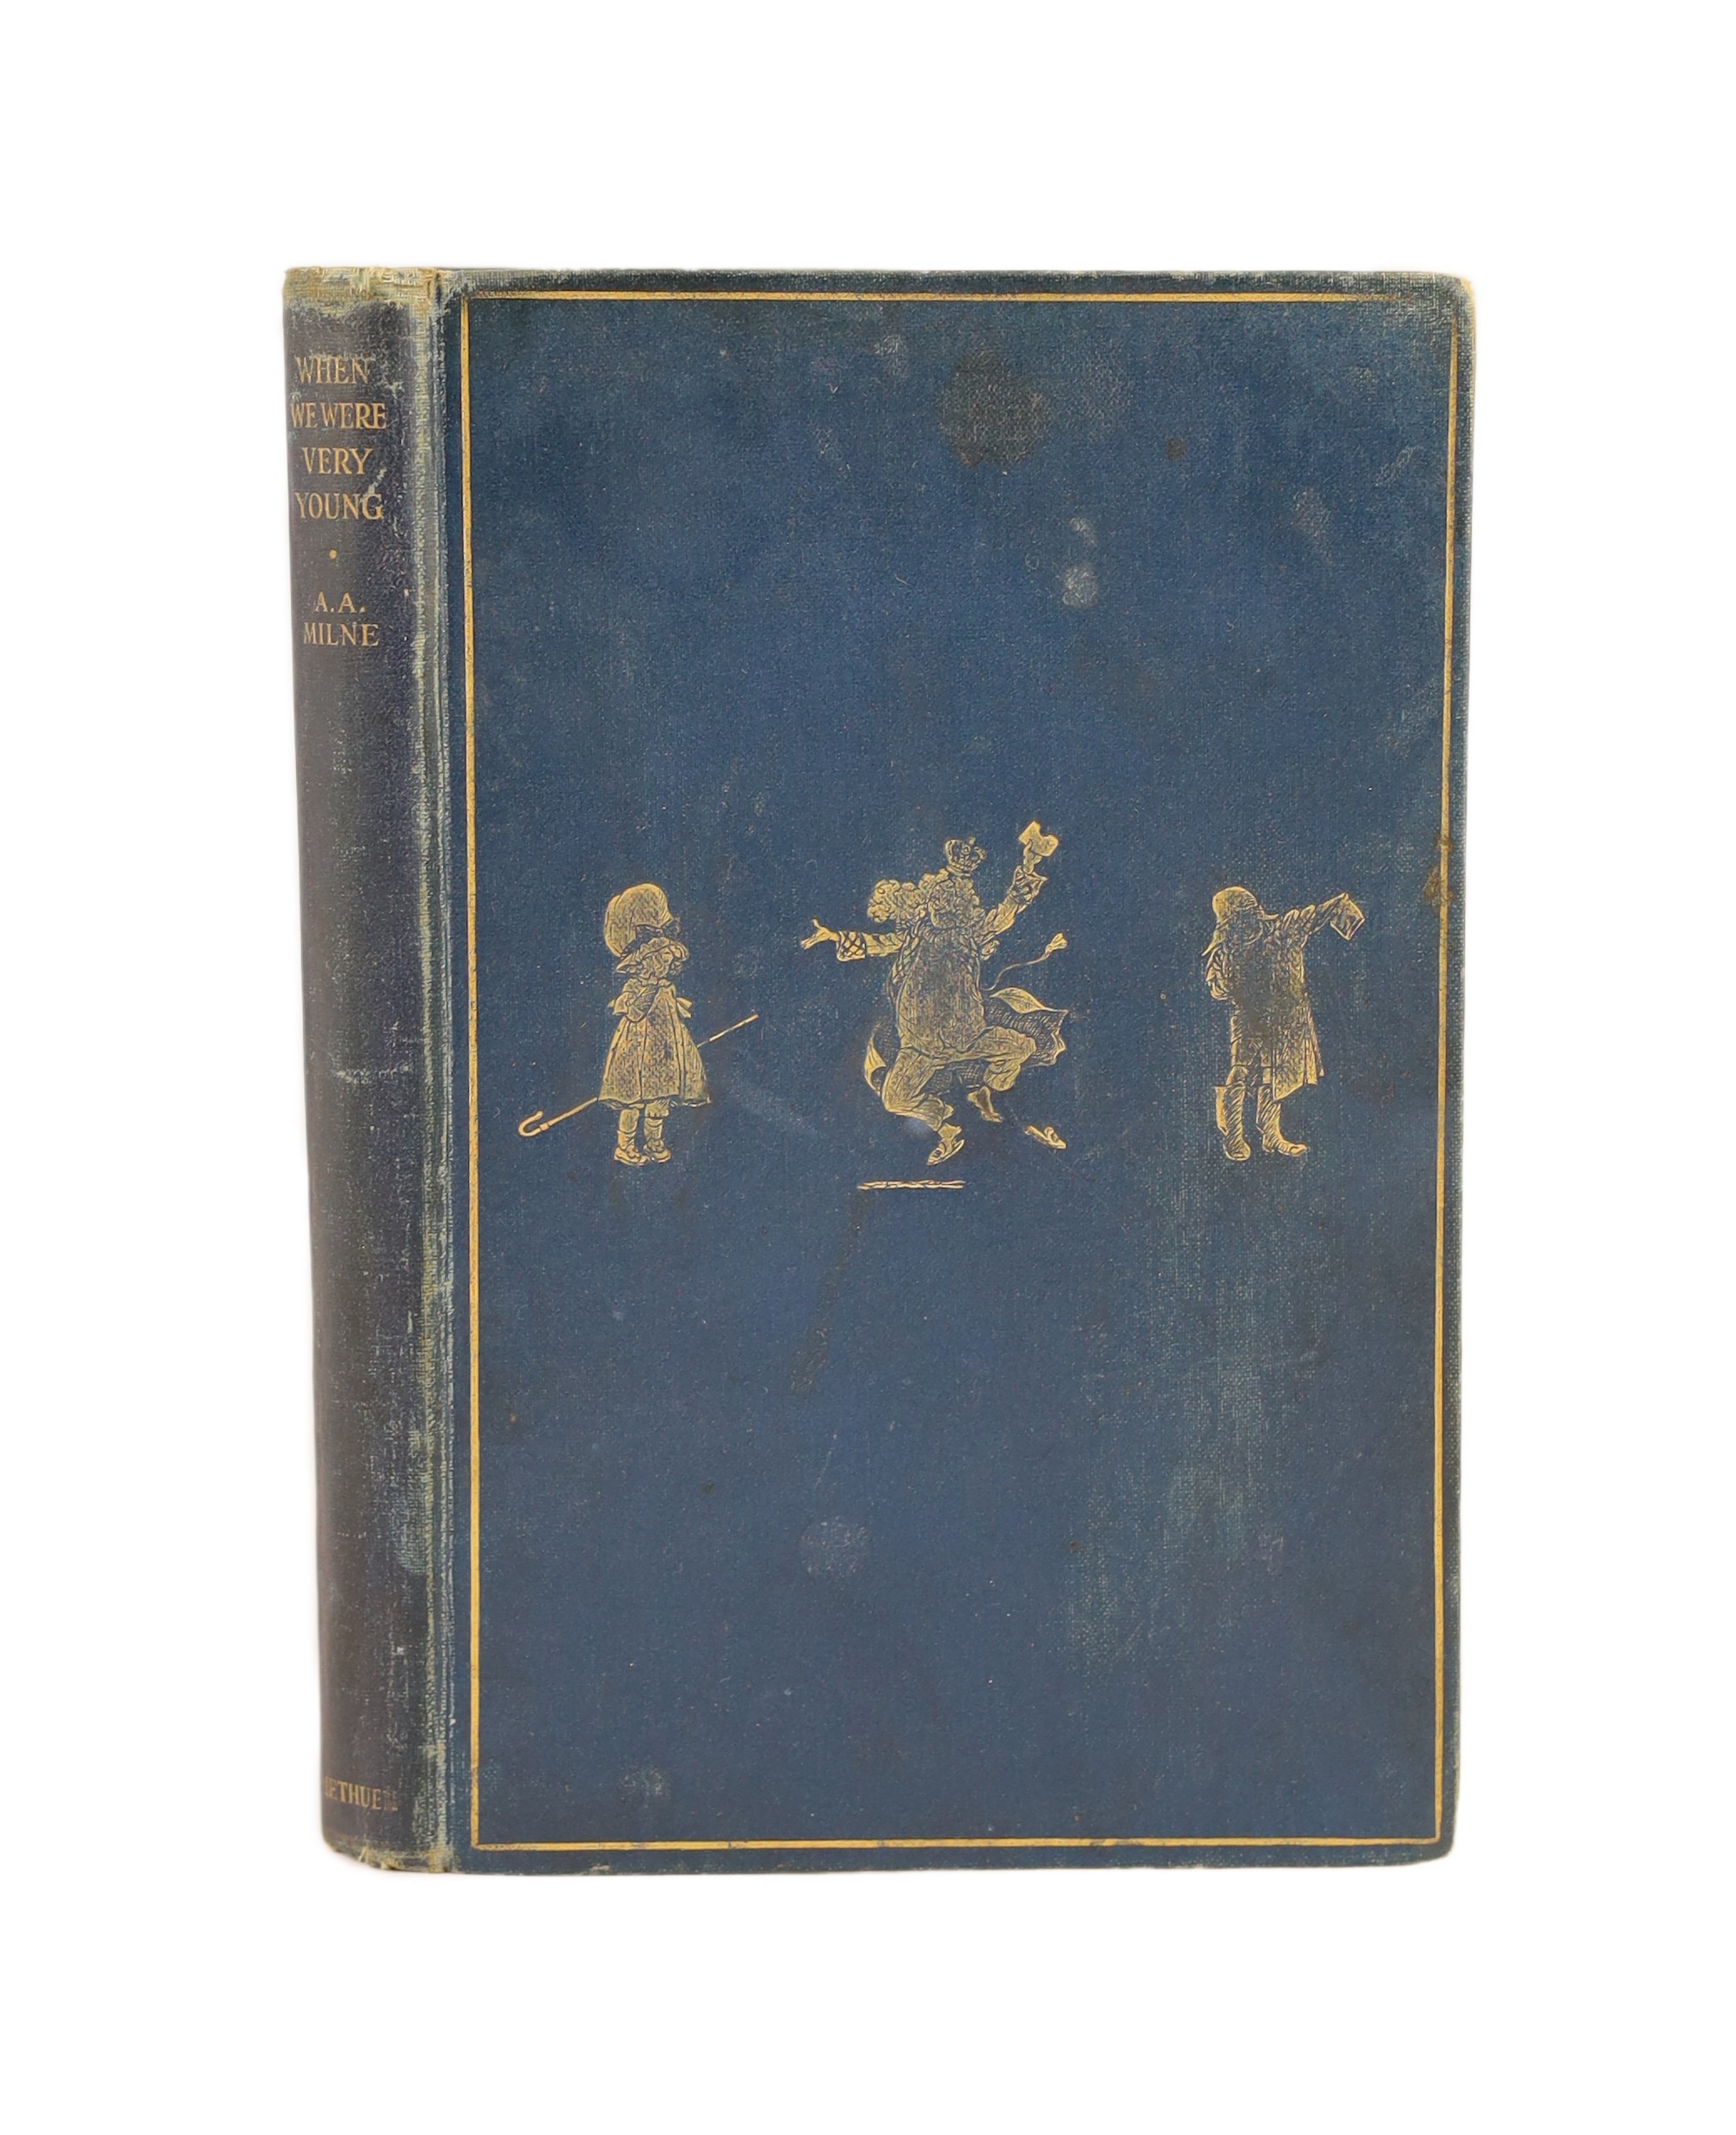 Milne, Alan Alexander - When We Were Very Young, 1s edition, first printing, first state, (without ‘’ix’’ to foot of contents page), illustrated by Ernest Shepard, 8vo, original blue pictorial cloth gilt stamped, ownersh